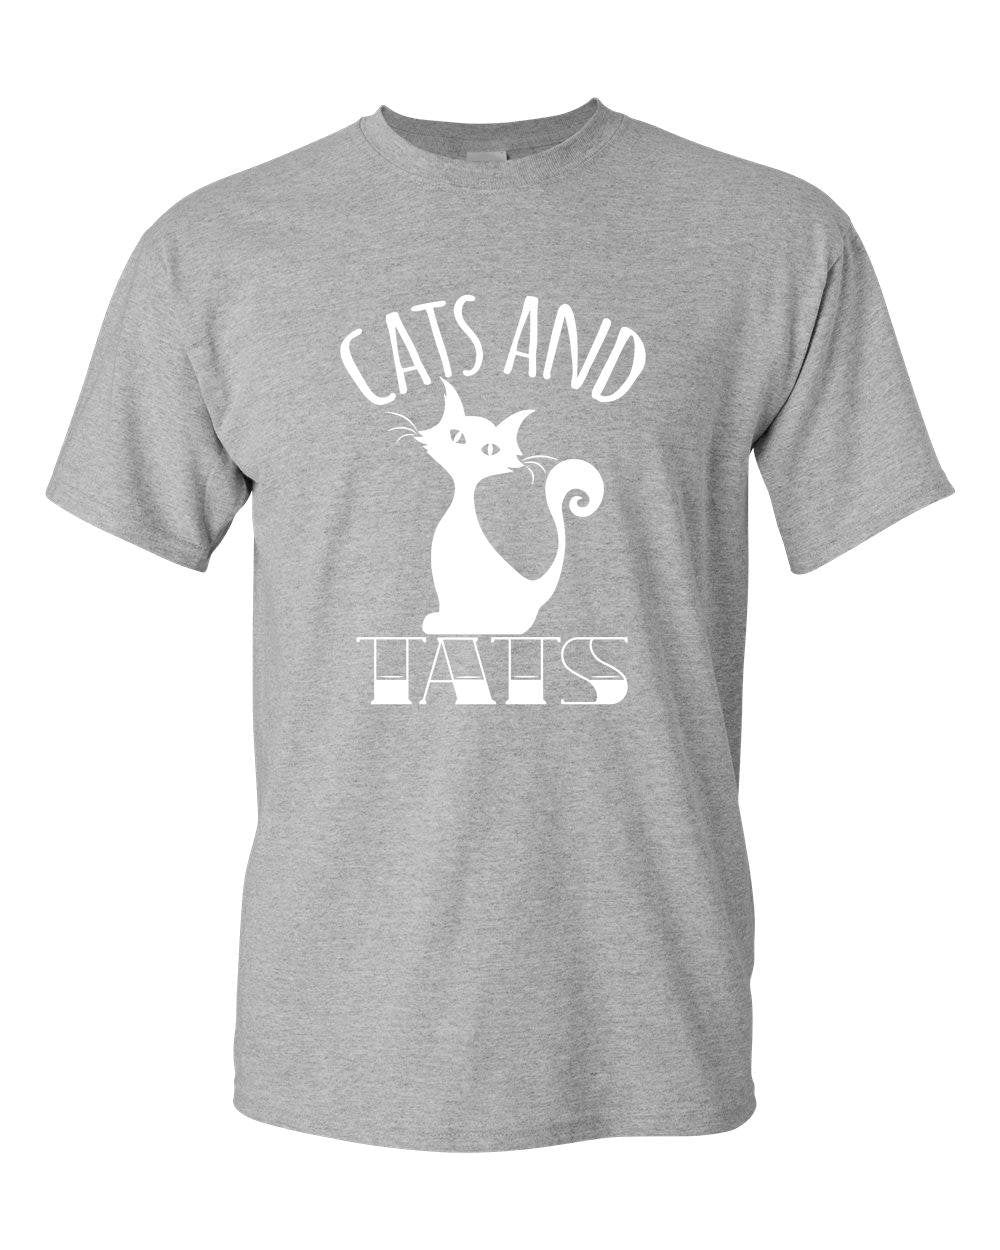 Cats And Tats Tattoo Adult Unisex T-Shirt Cat and Tattoo Lover